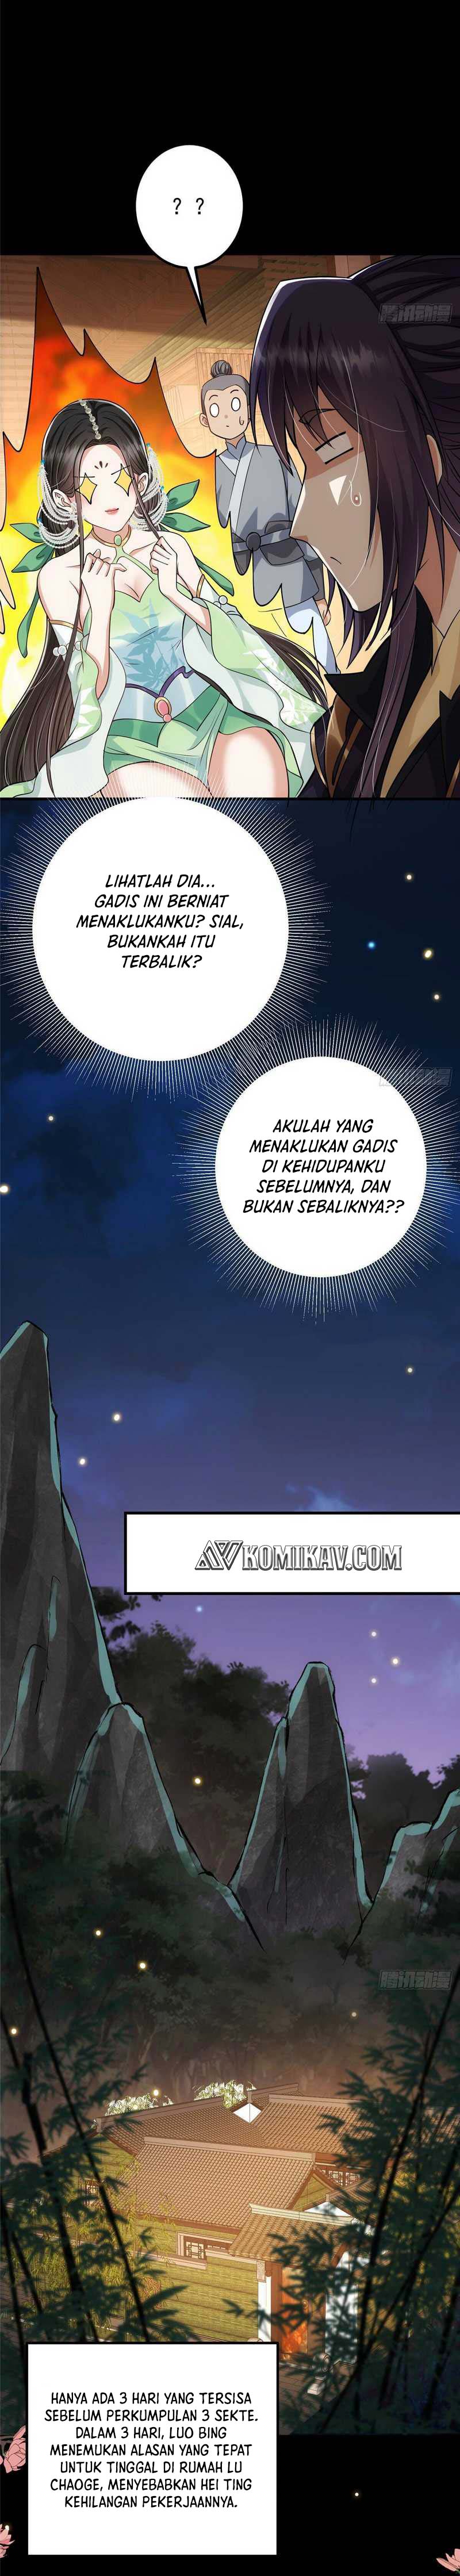 Keep A Low Profile, Sect Leader Chapter 23 Bahasa Indonesia